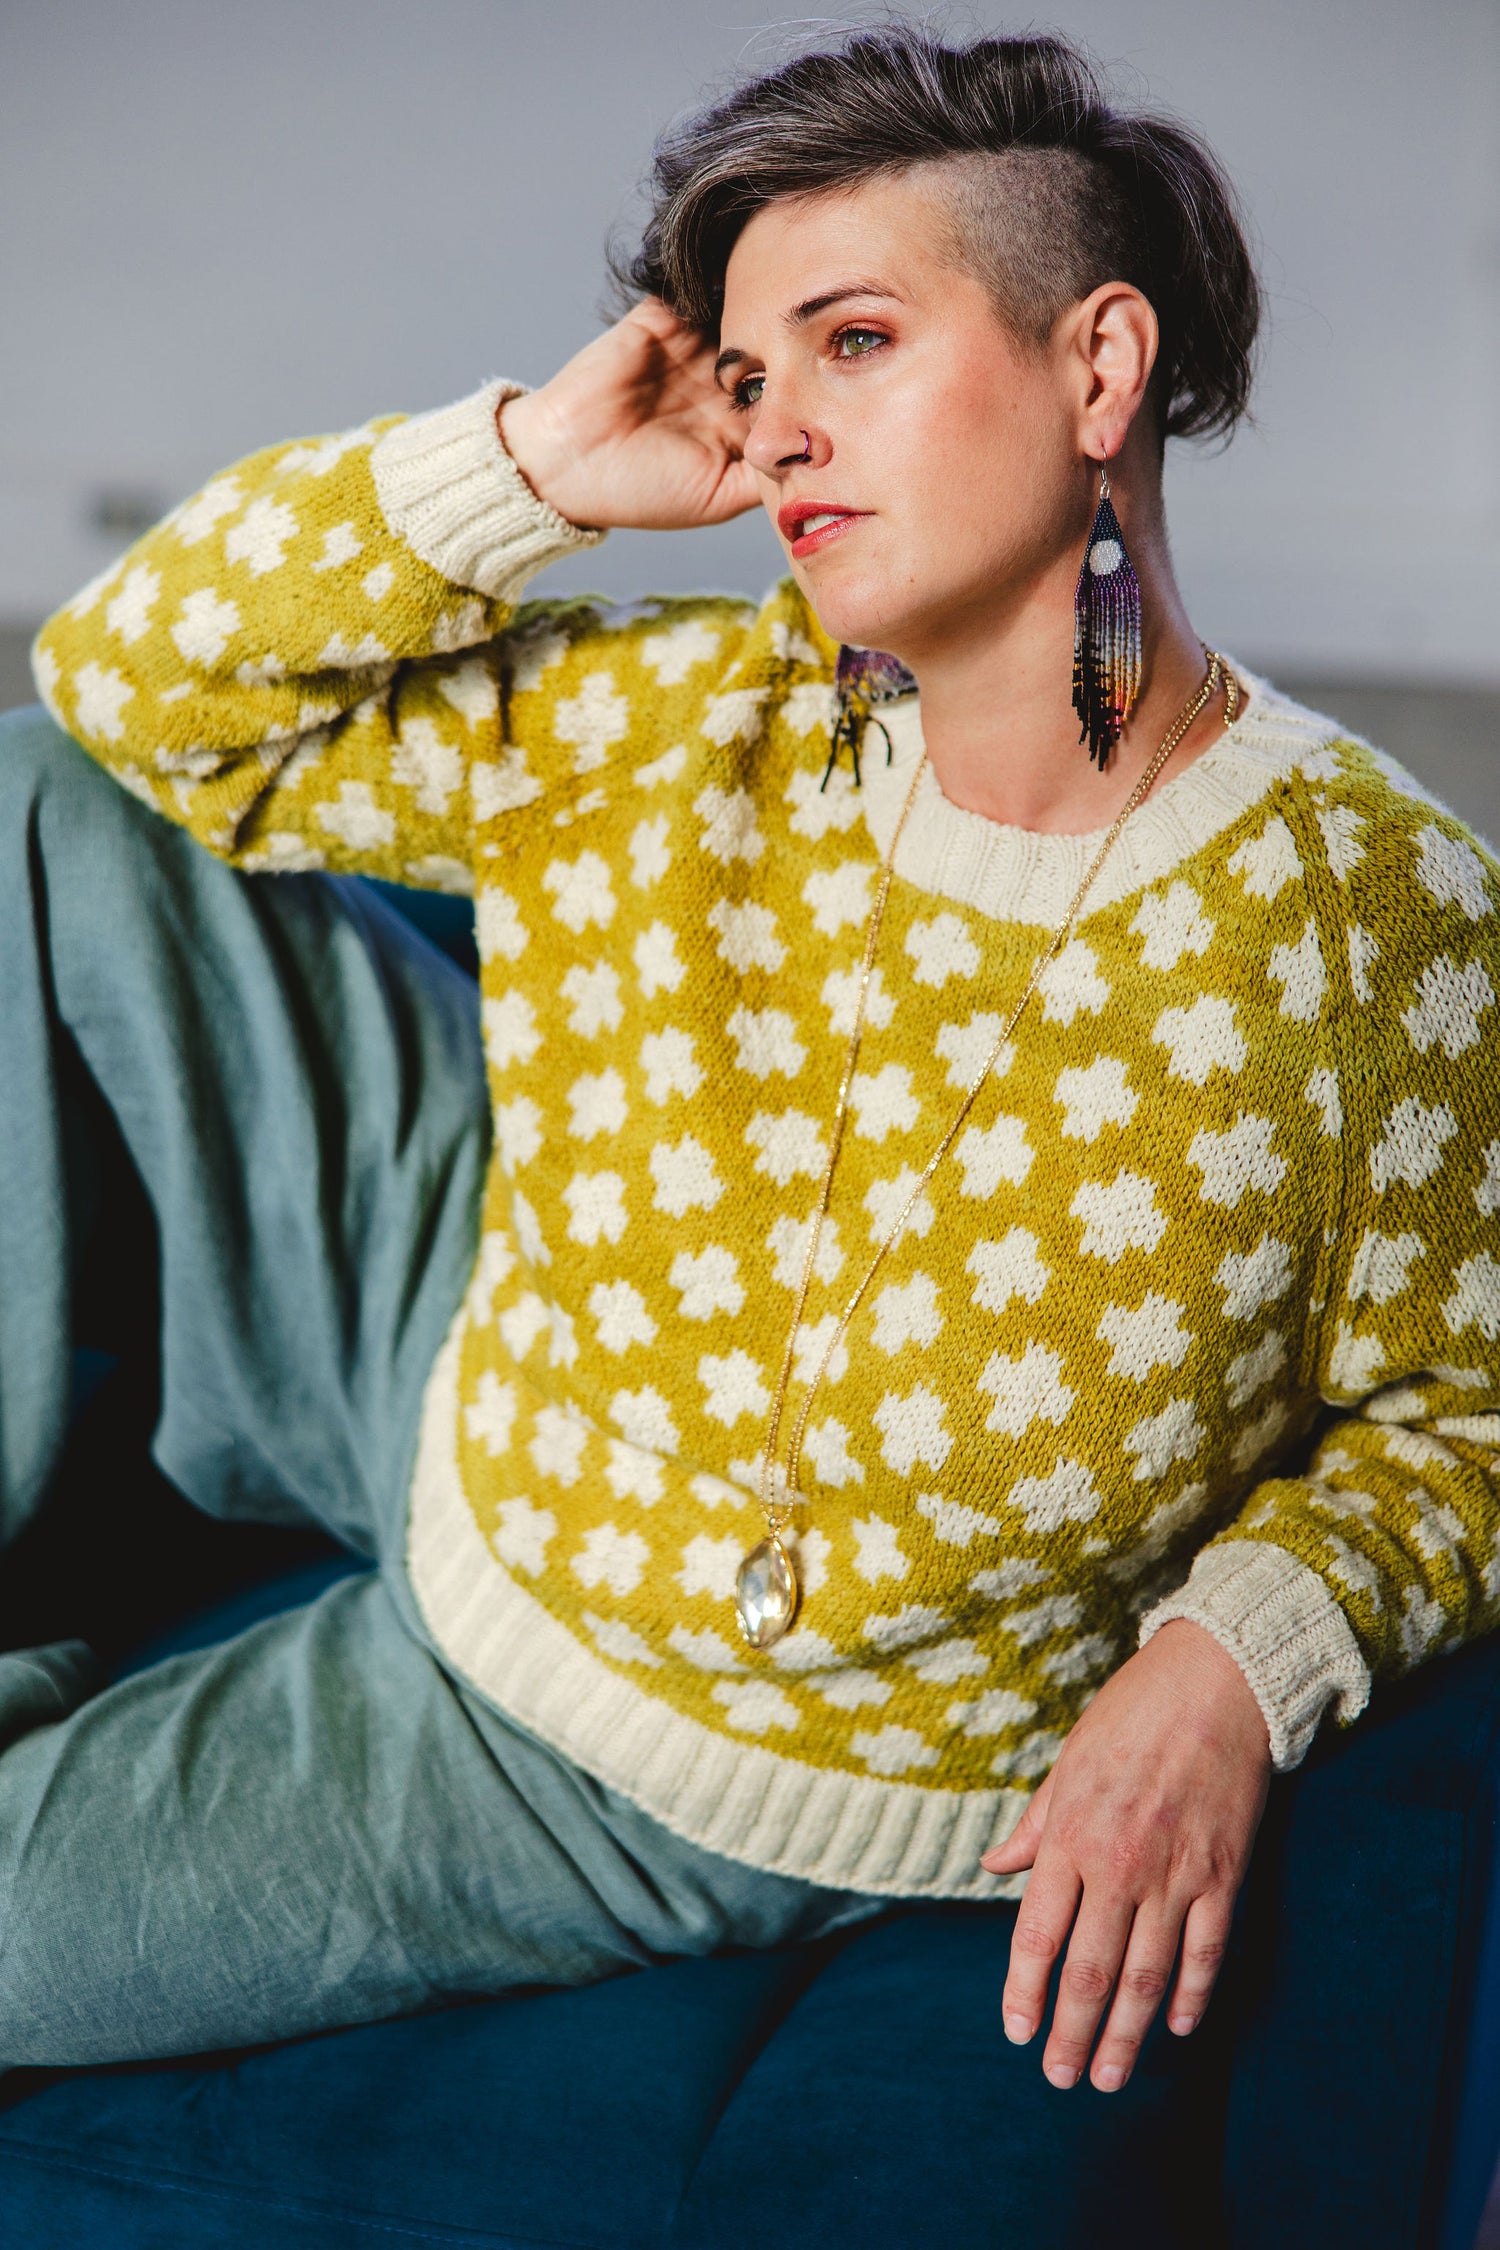 Jen wears Plusses in ochre and cream, an allover colorwork pullover hand knit seamlessly